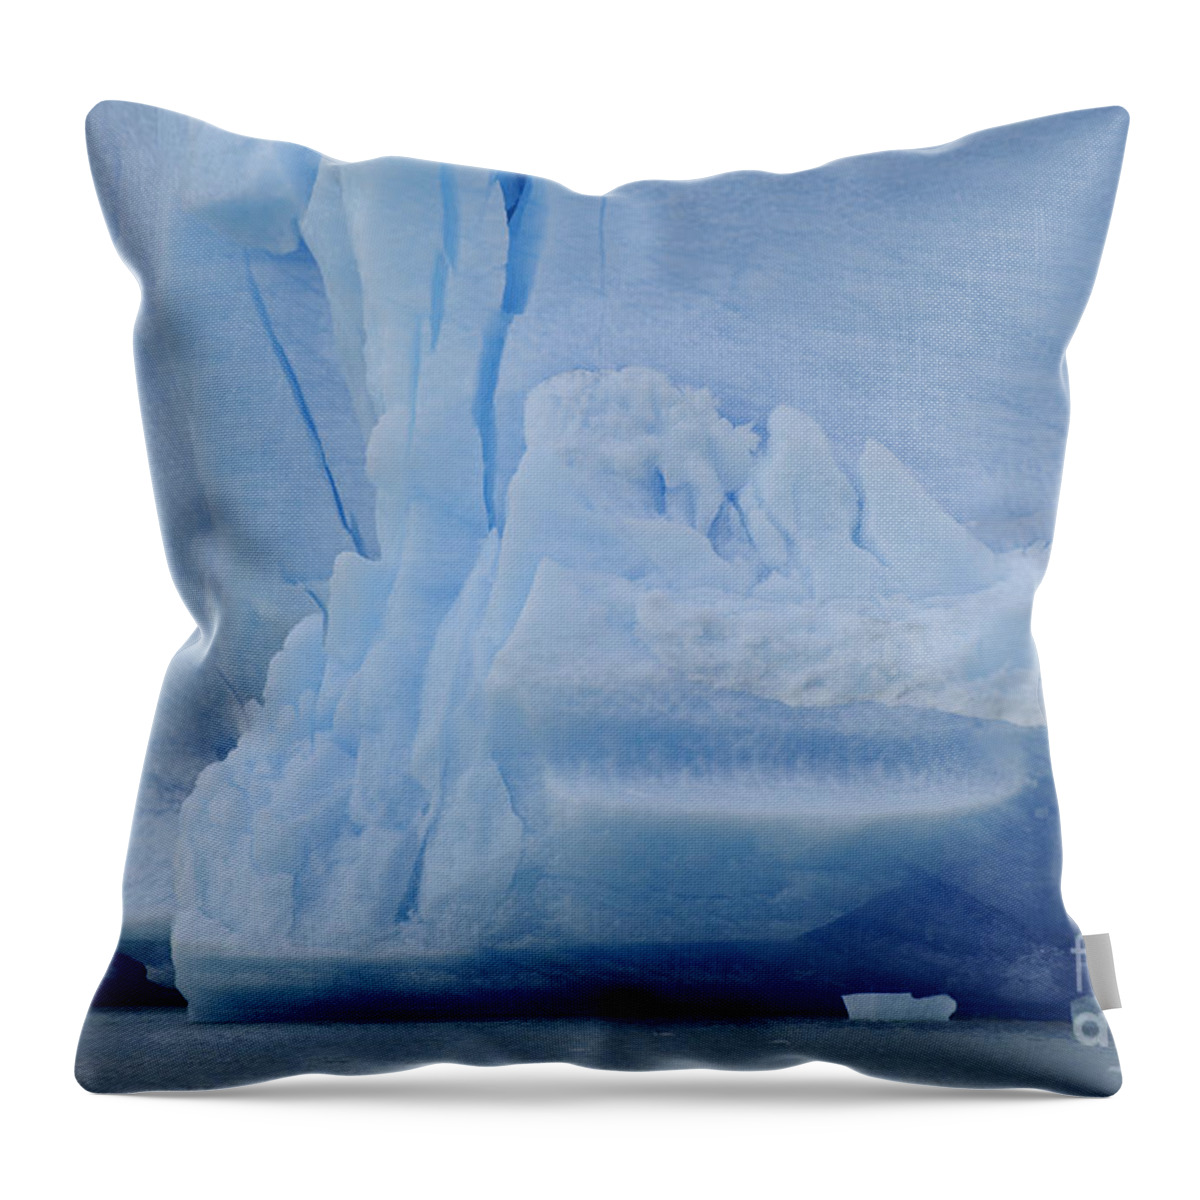 Chile Throw Pillow featuring the photograph Grey Glacier In Chilean National Park #1 by John Shaw